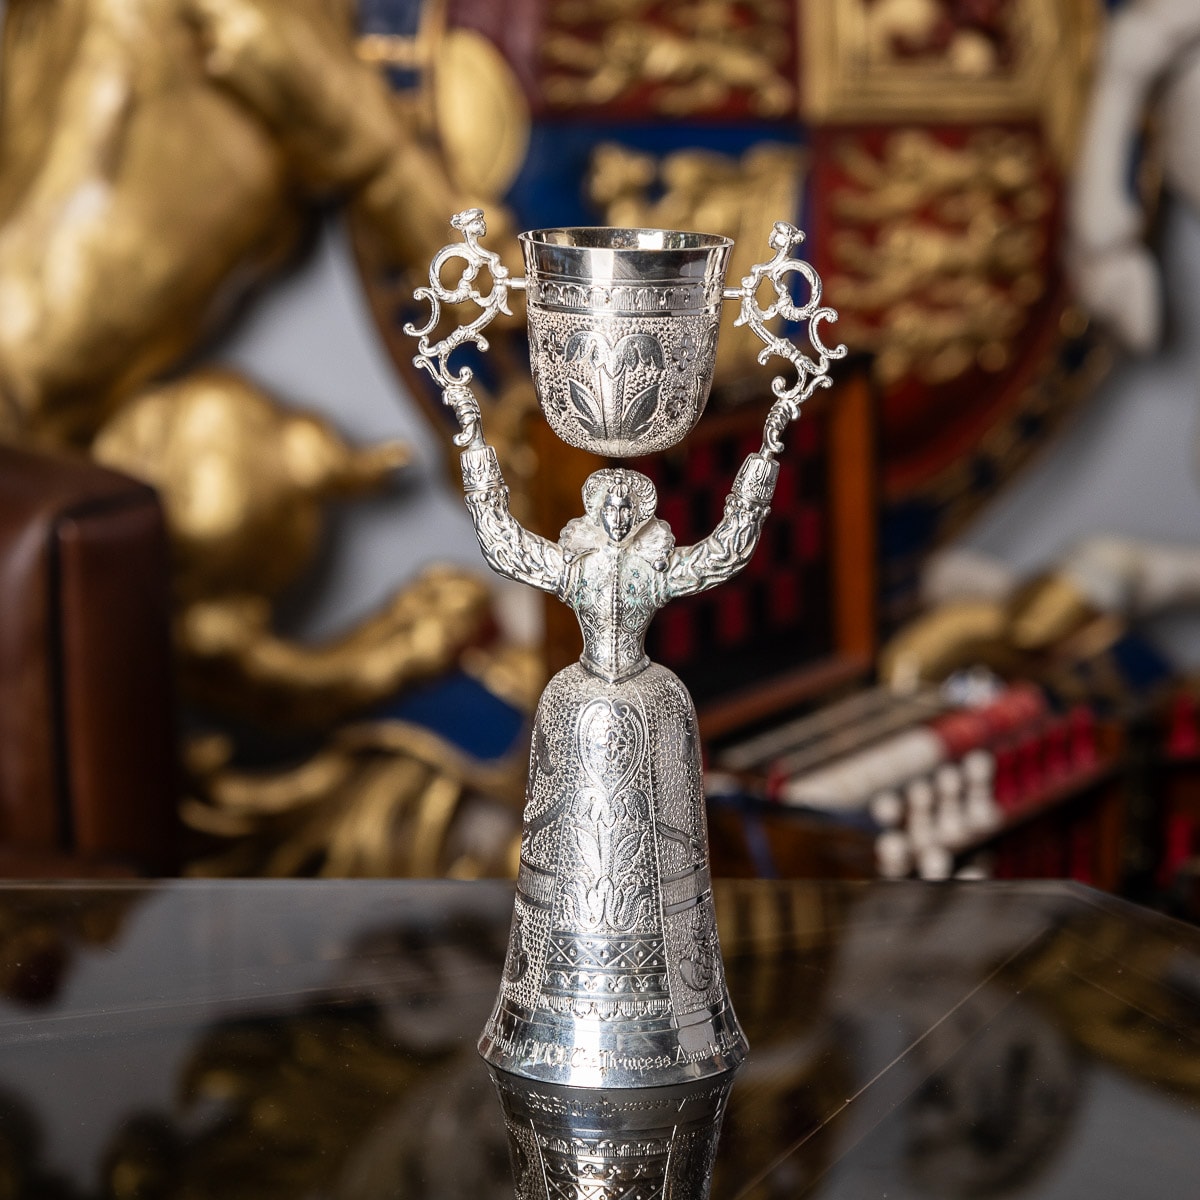 A ROYAL WEDDING SOLID STERLING SILVER NOVELTY WAGER CUP, LONDON, C. 1973 - Image 2 of 23